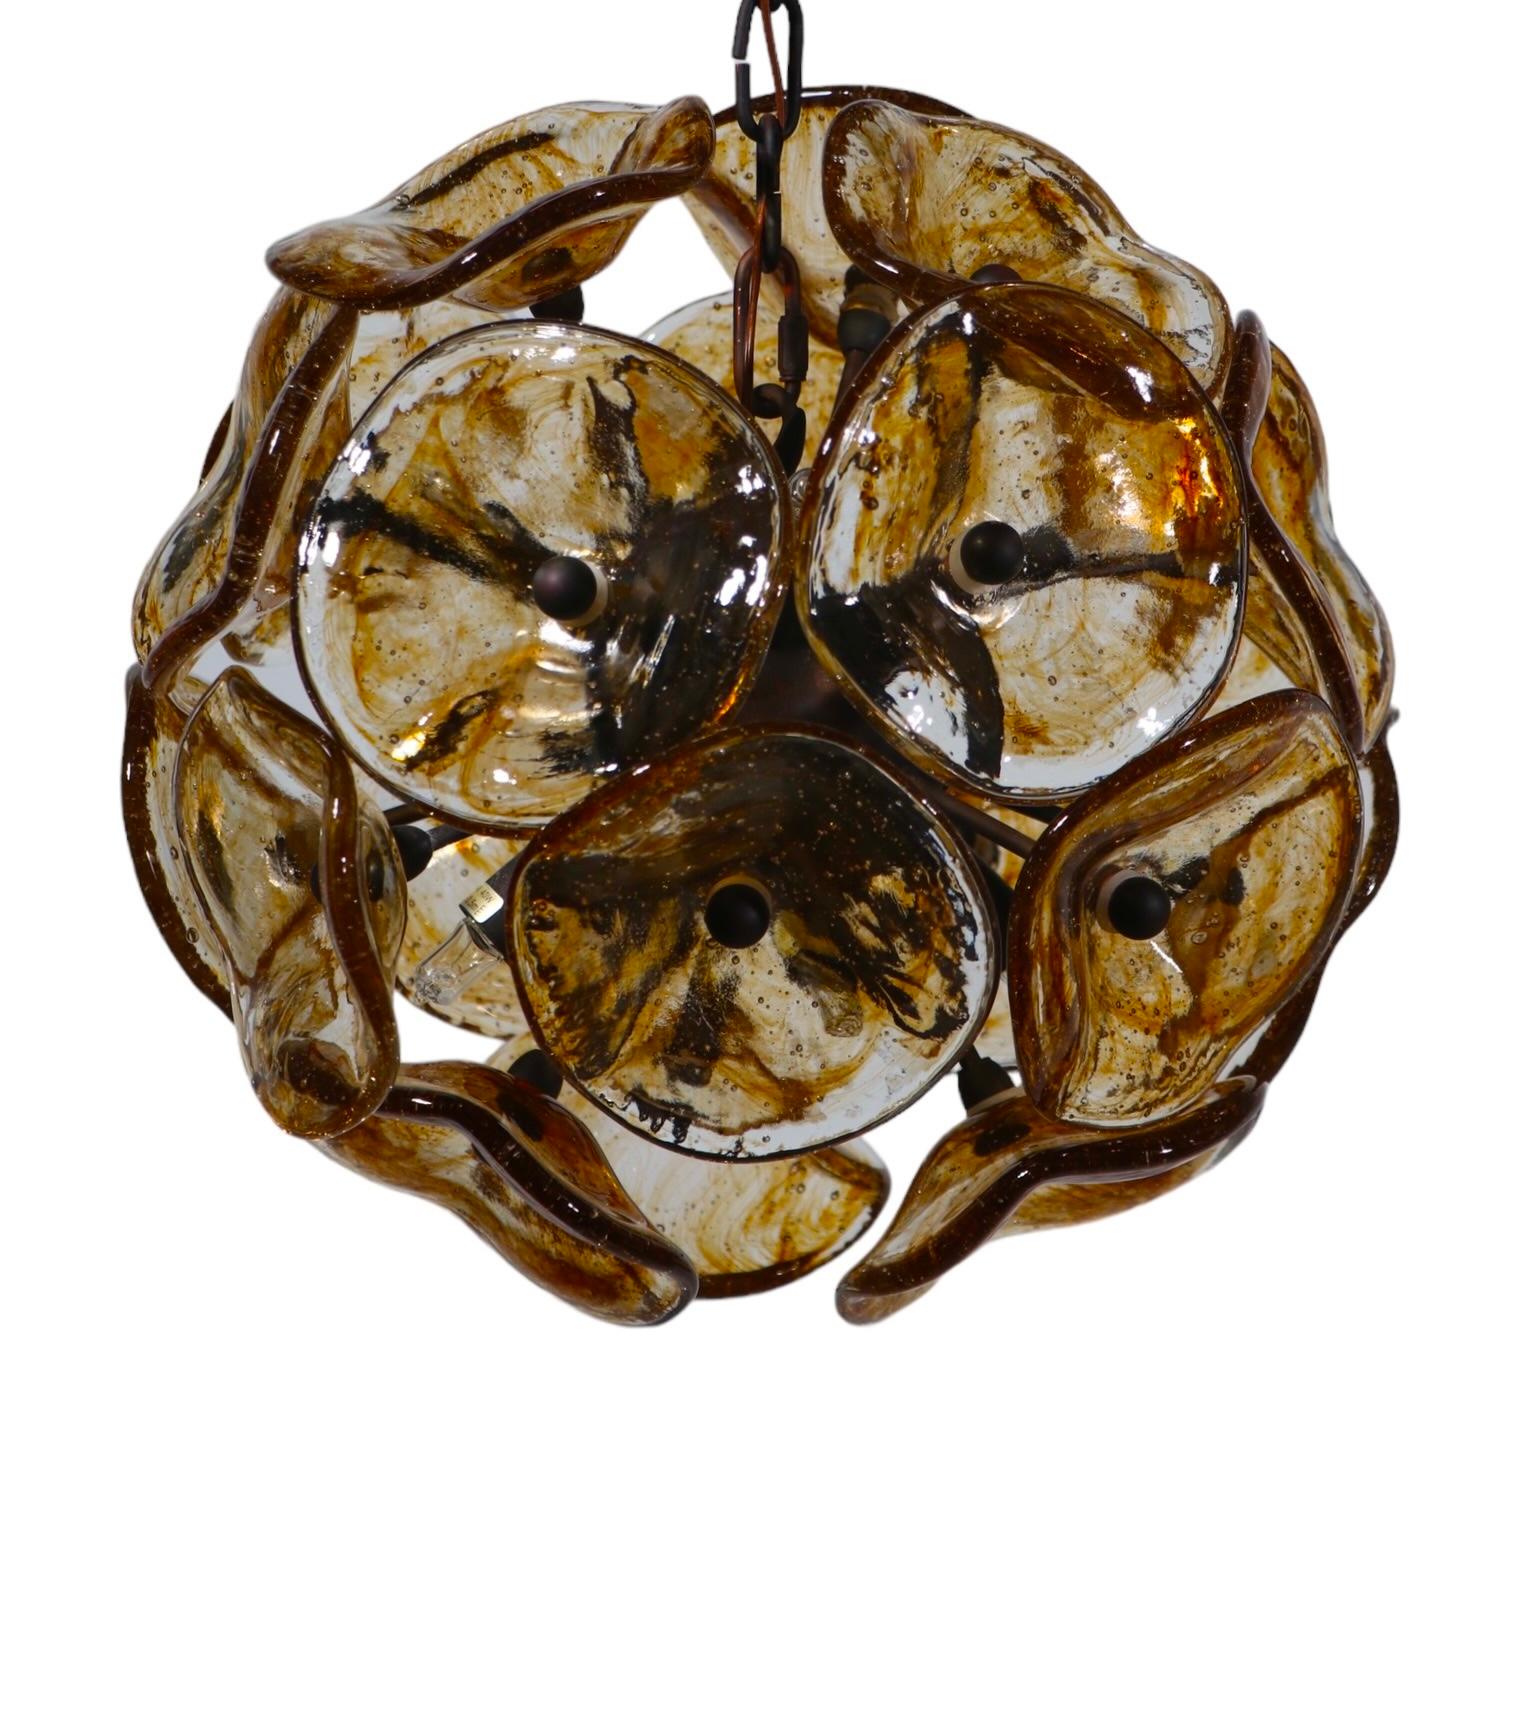 Post Modern Chandelier with Murano Glass Flowers by Fiori c 1990 -2010 For Sale 1